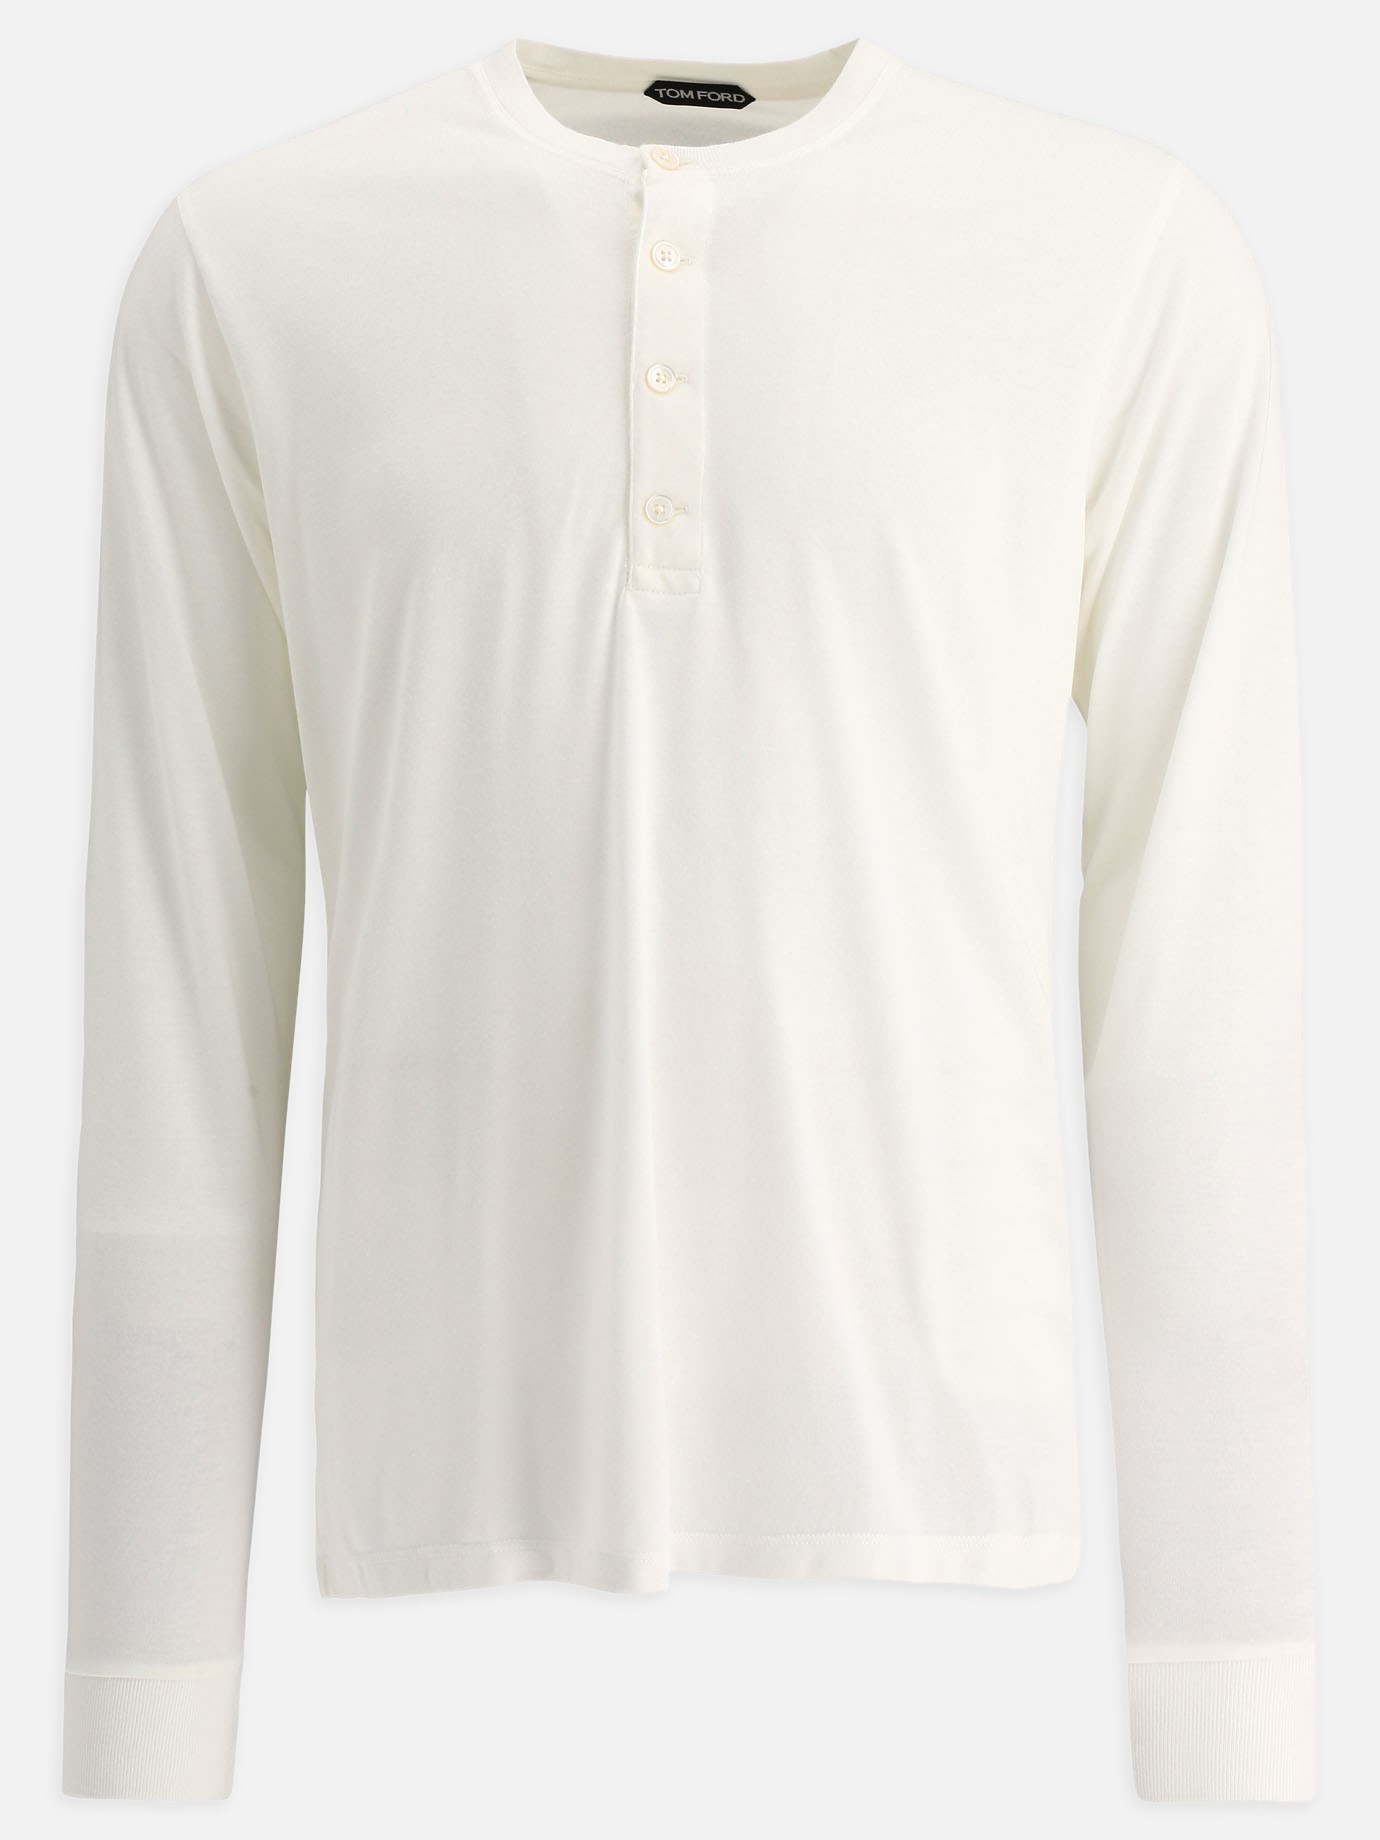  Henley  t-shirtby Tom Ford - 3